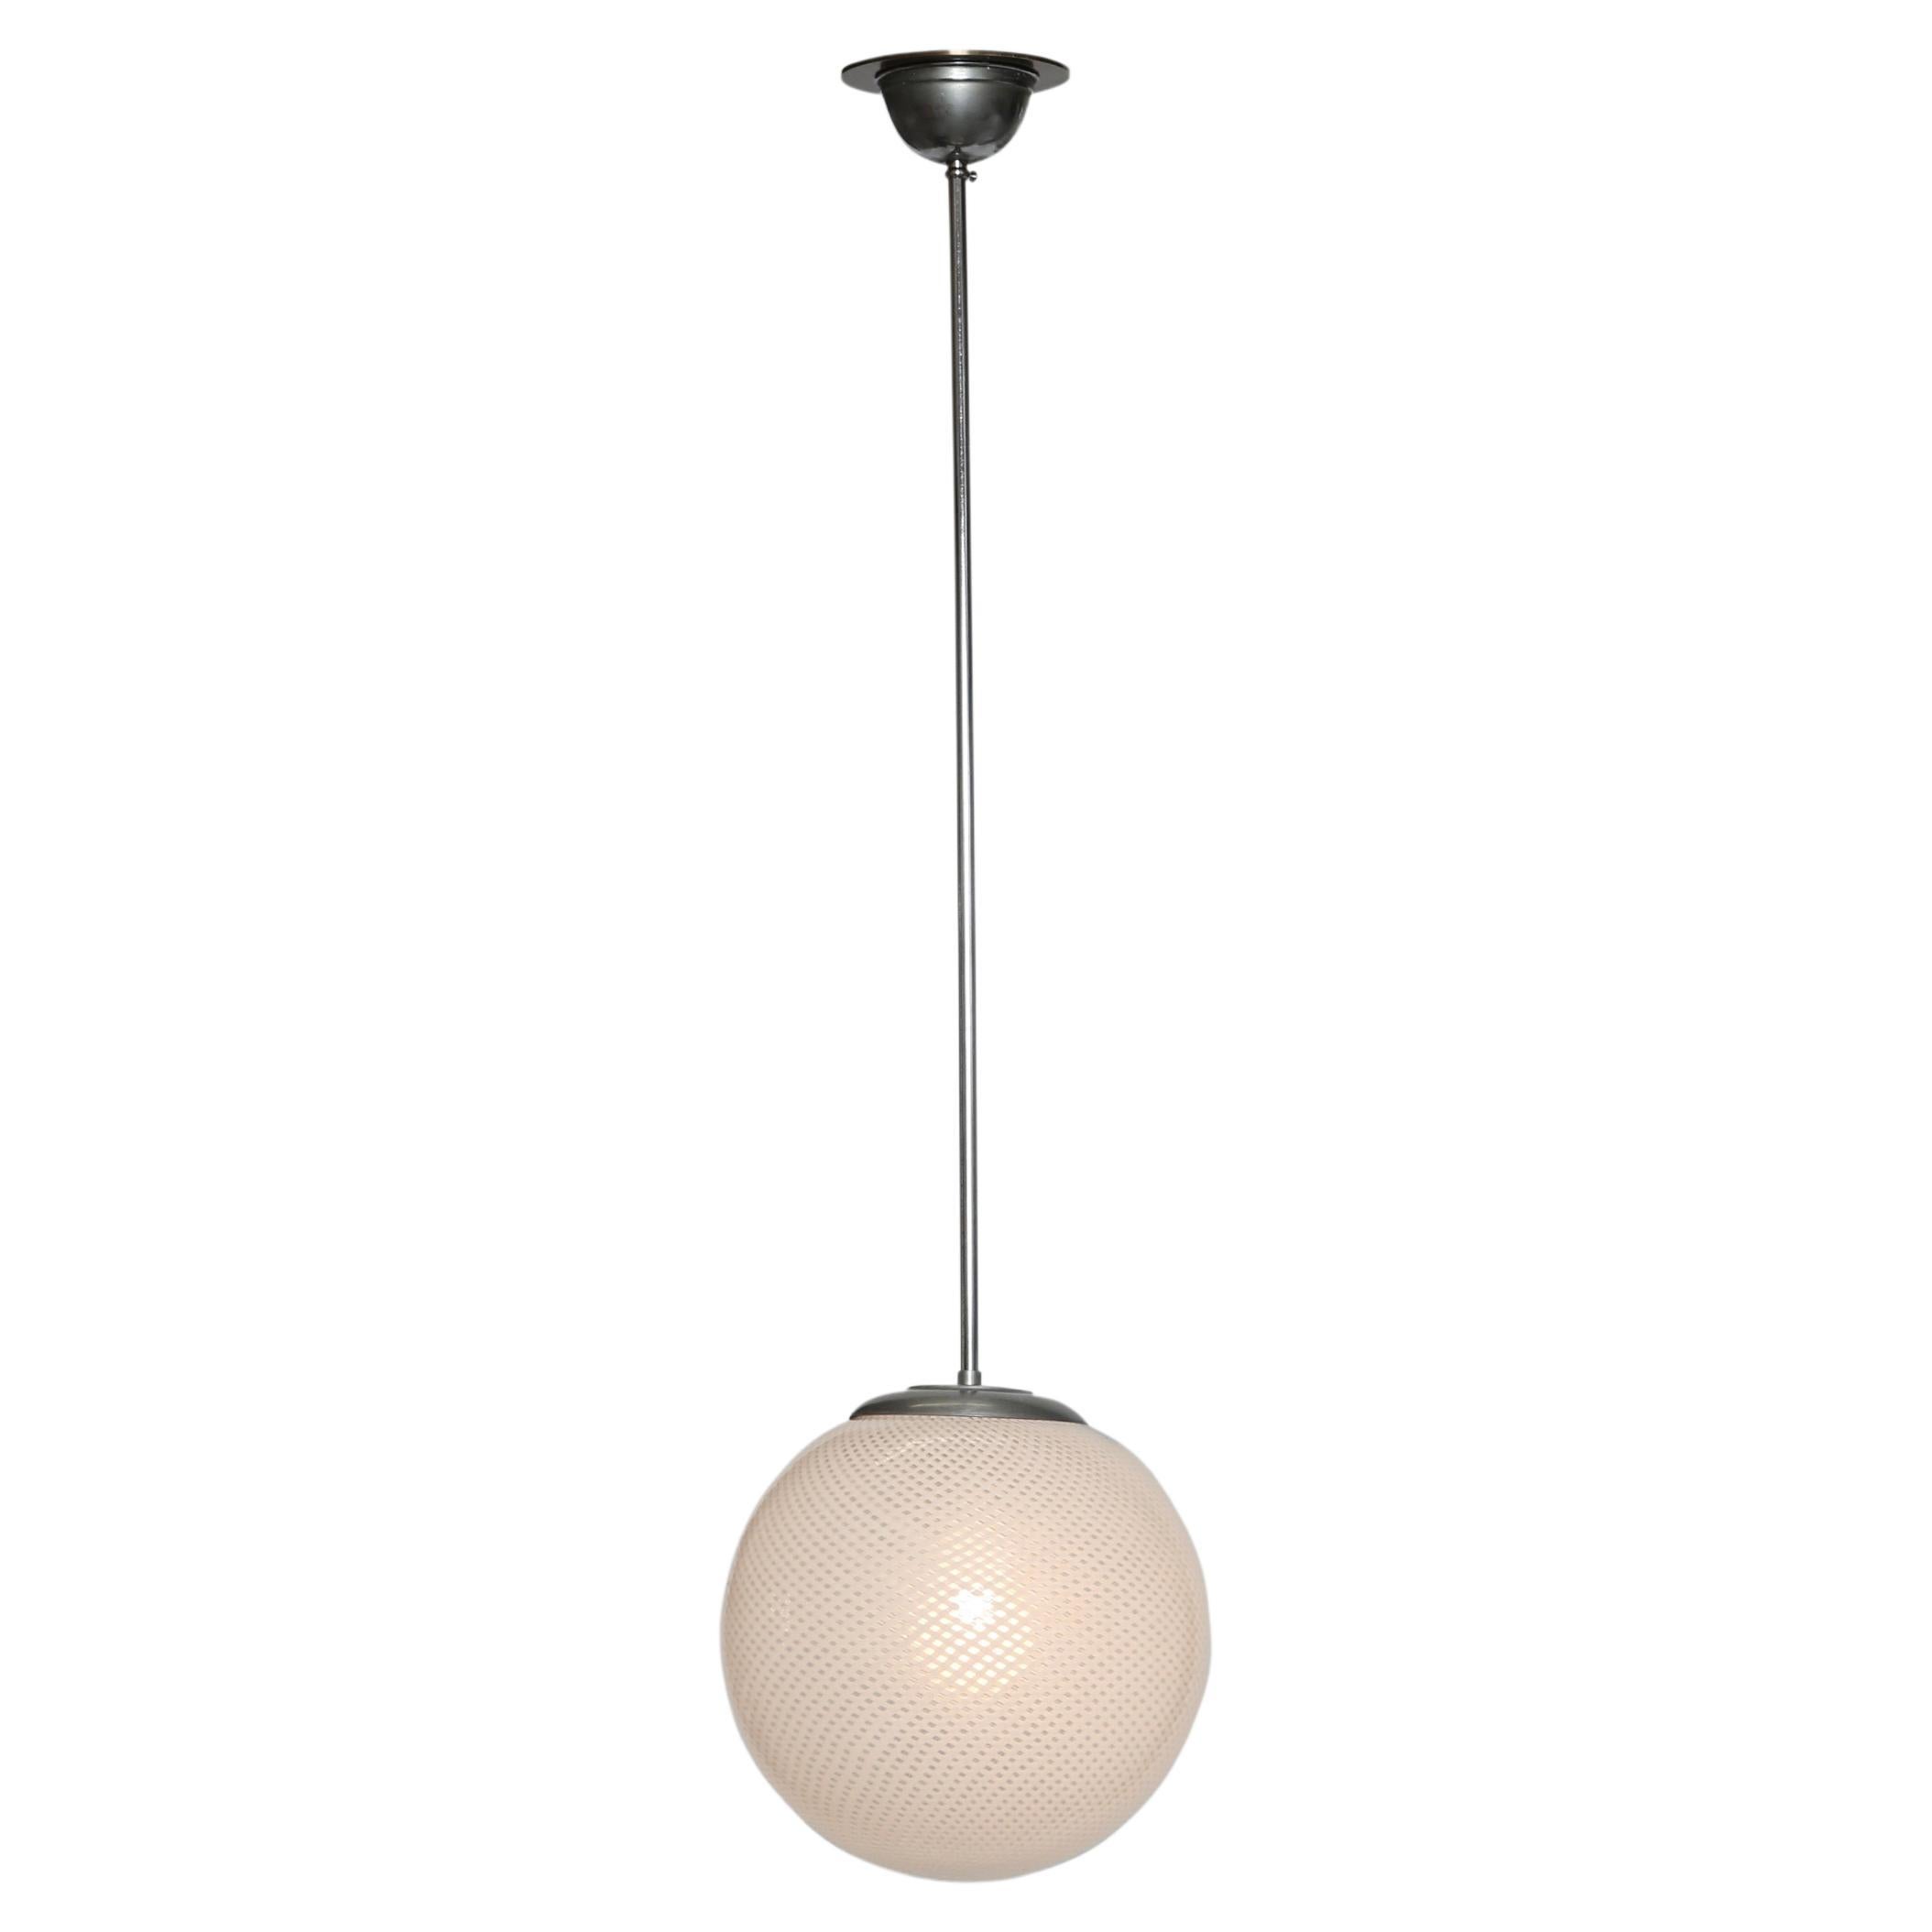 Carlo Scarpa for Venini ceiling lights
Model 5258
Italy 1940s
Handblown glass, brass
Exquisite glass making technique.
Price is for one light.
Four lights are available.

We take pride in bringing vintage fixtures to their full glory again.
At